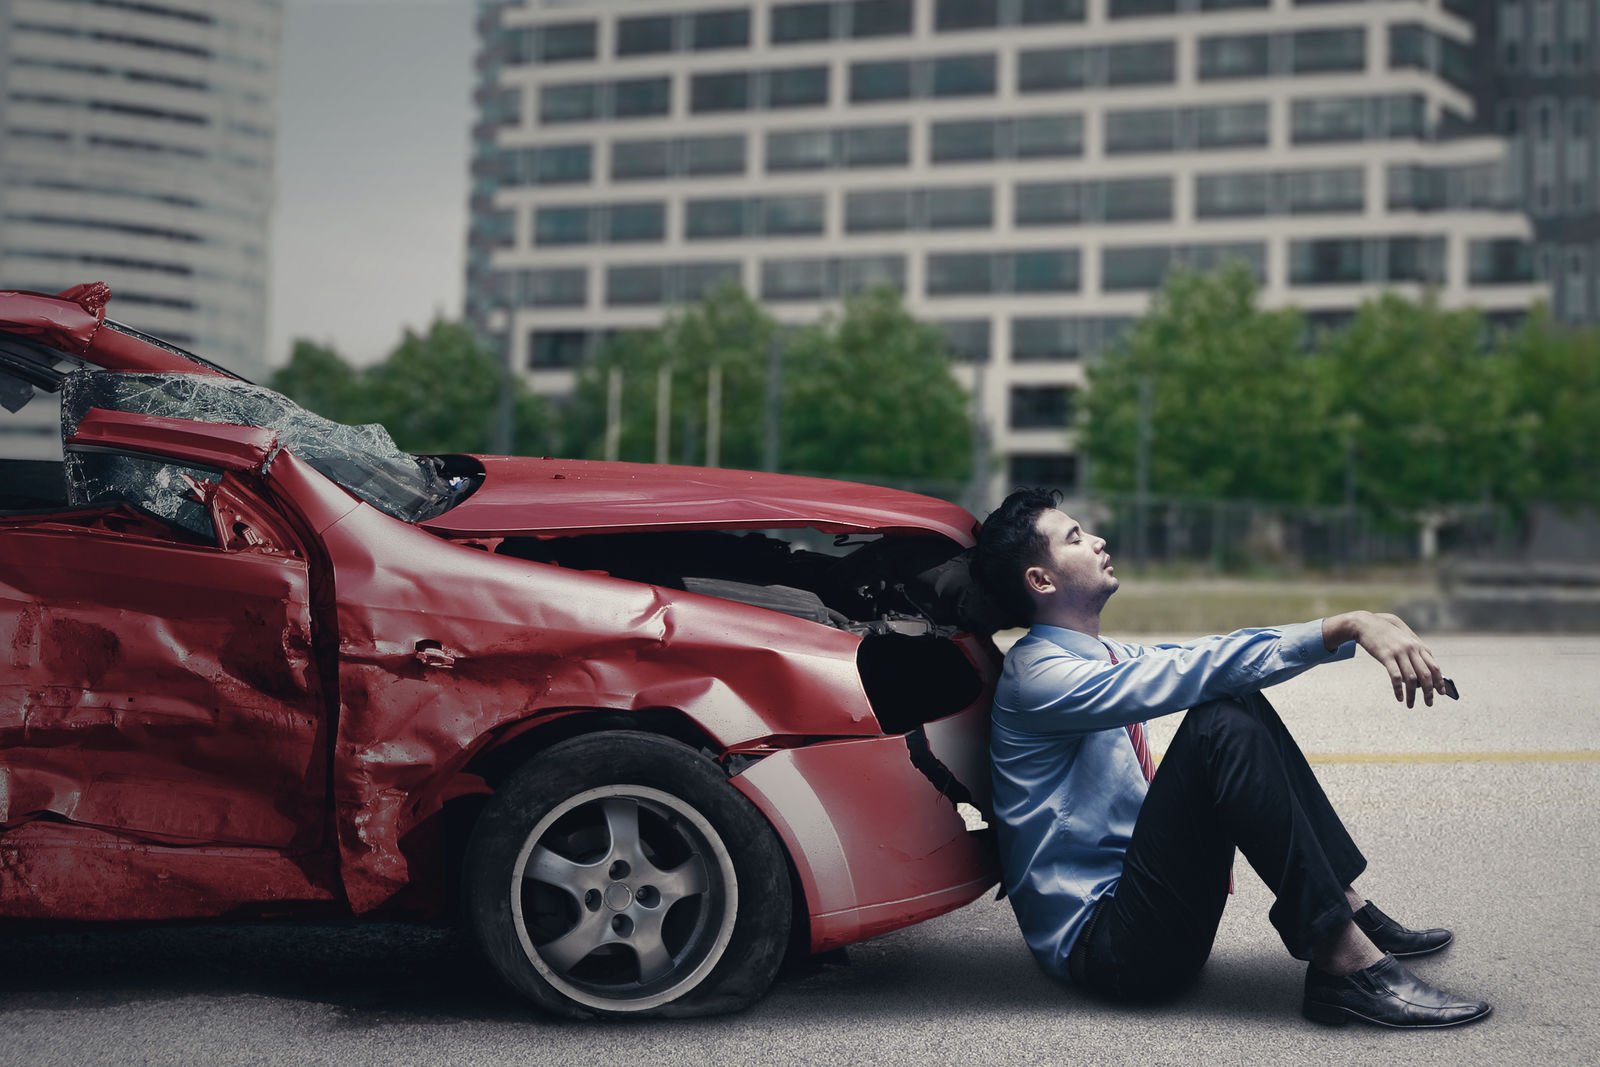 Do I have to pay insurance for a totaled car?